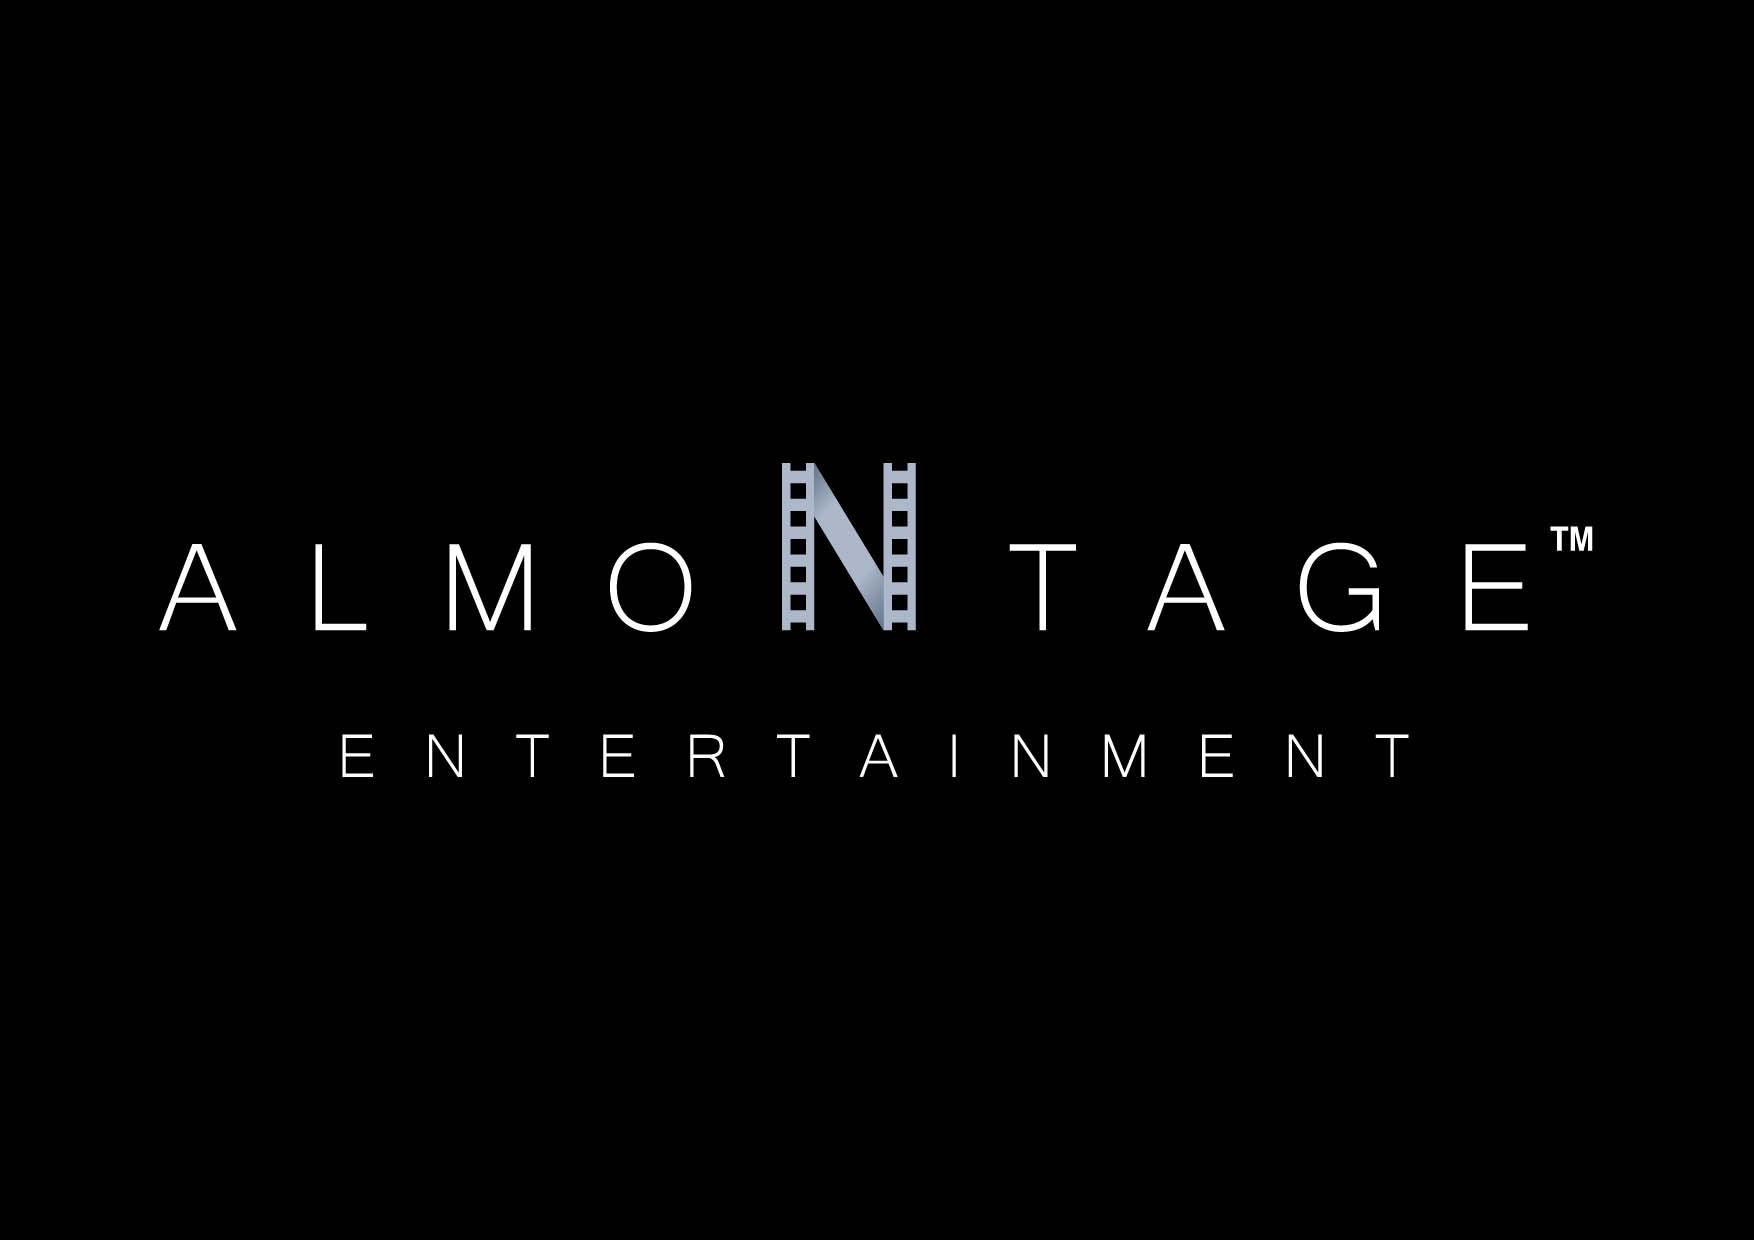 ALMONTAGE Entertainment profile on Qualified.One